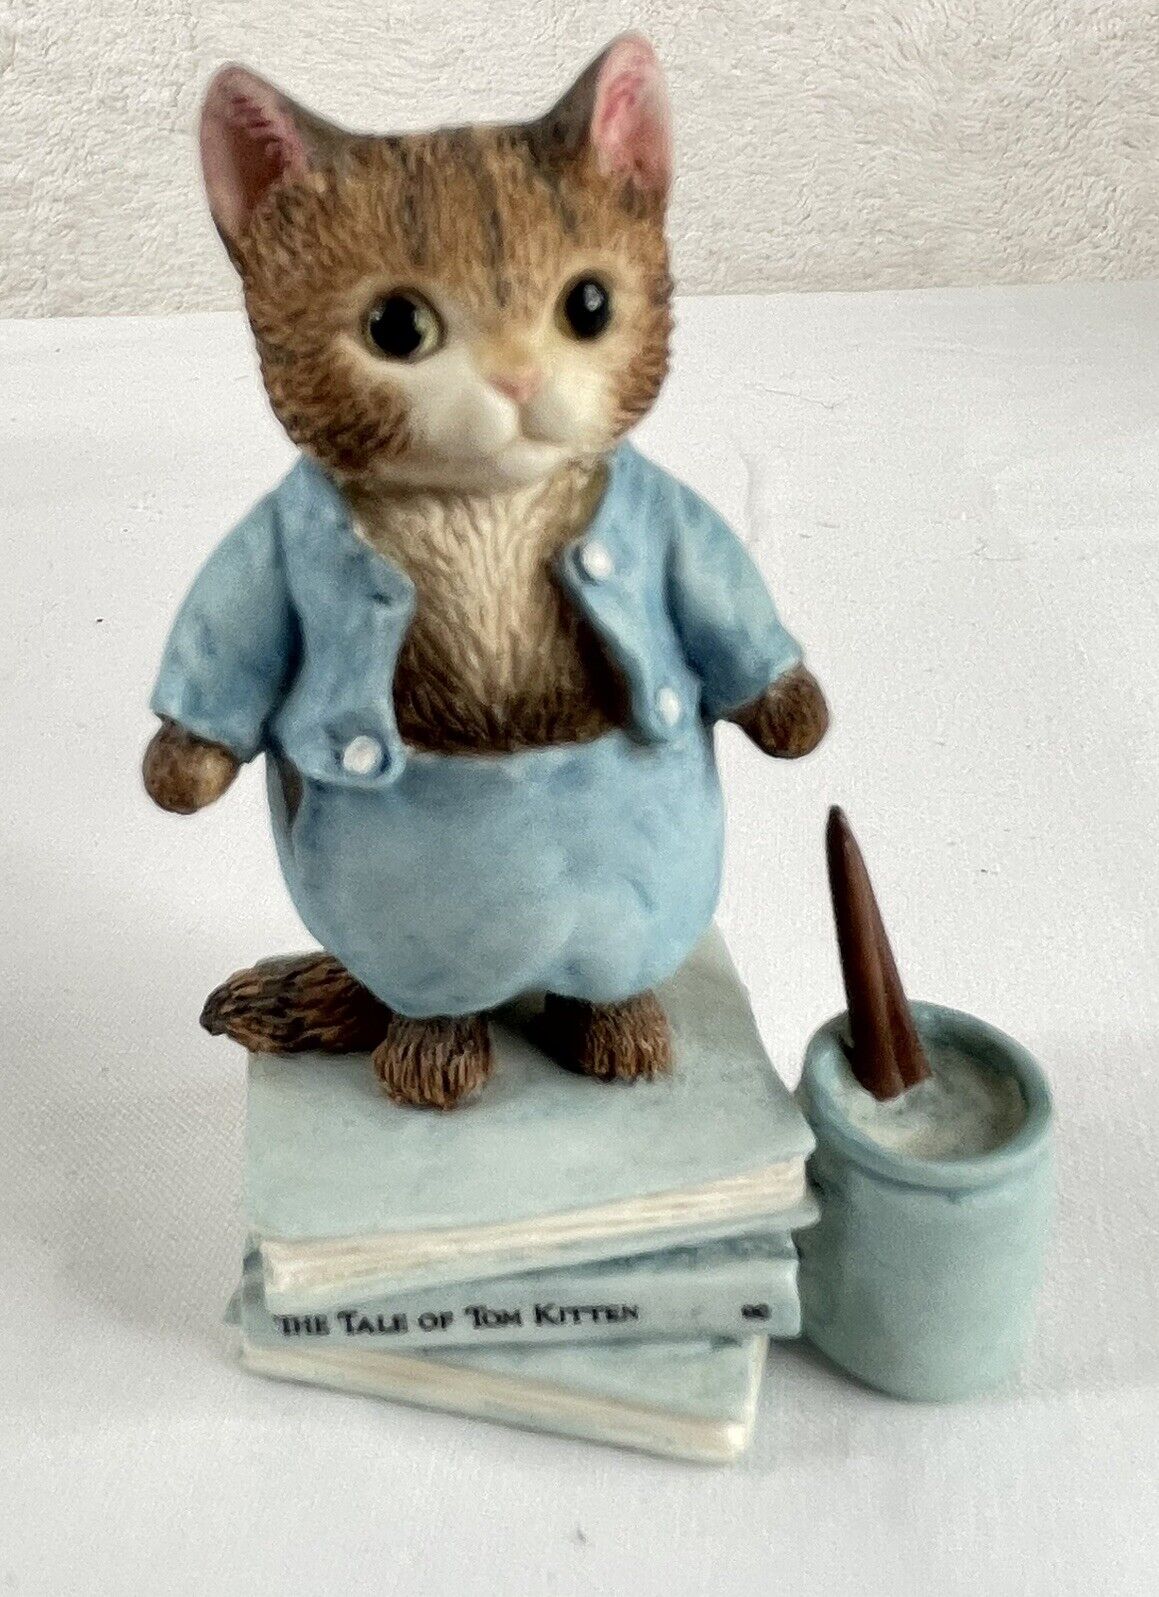 Vintage Tom Kitten Figurine The World of Beatrix Potter Numbered E8/679 With Box